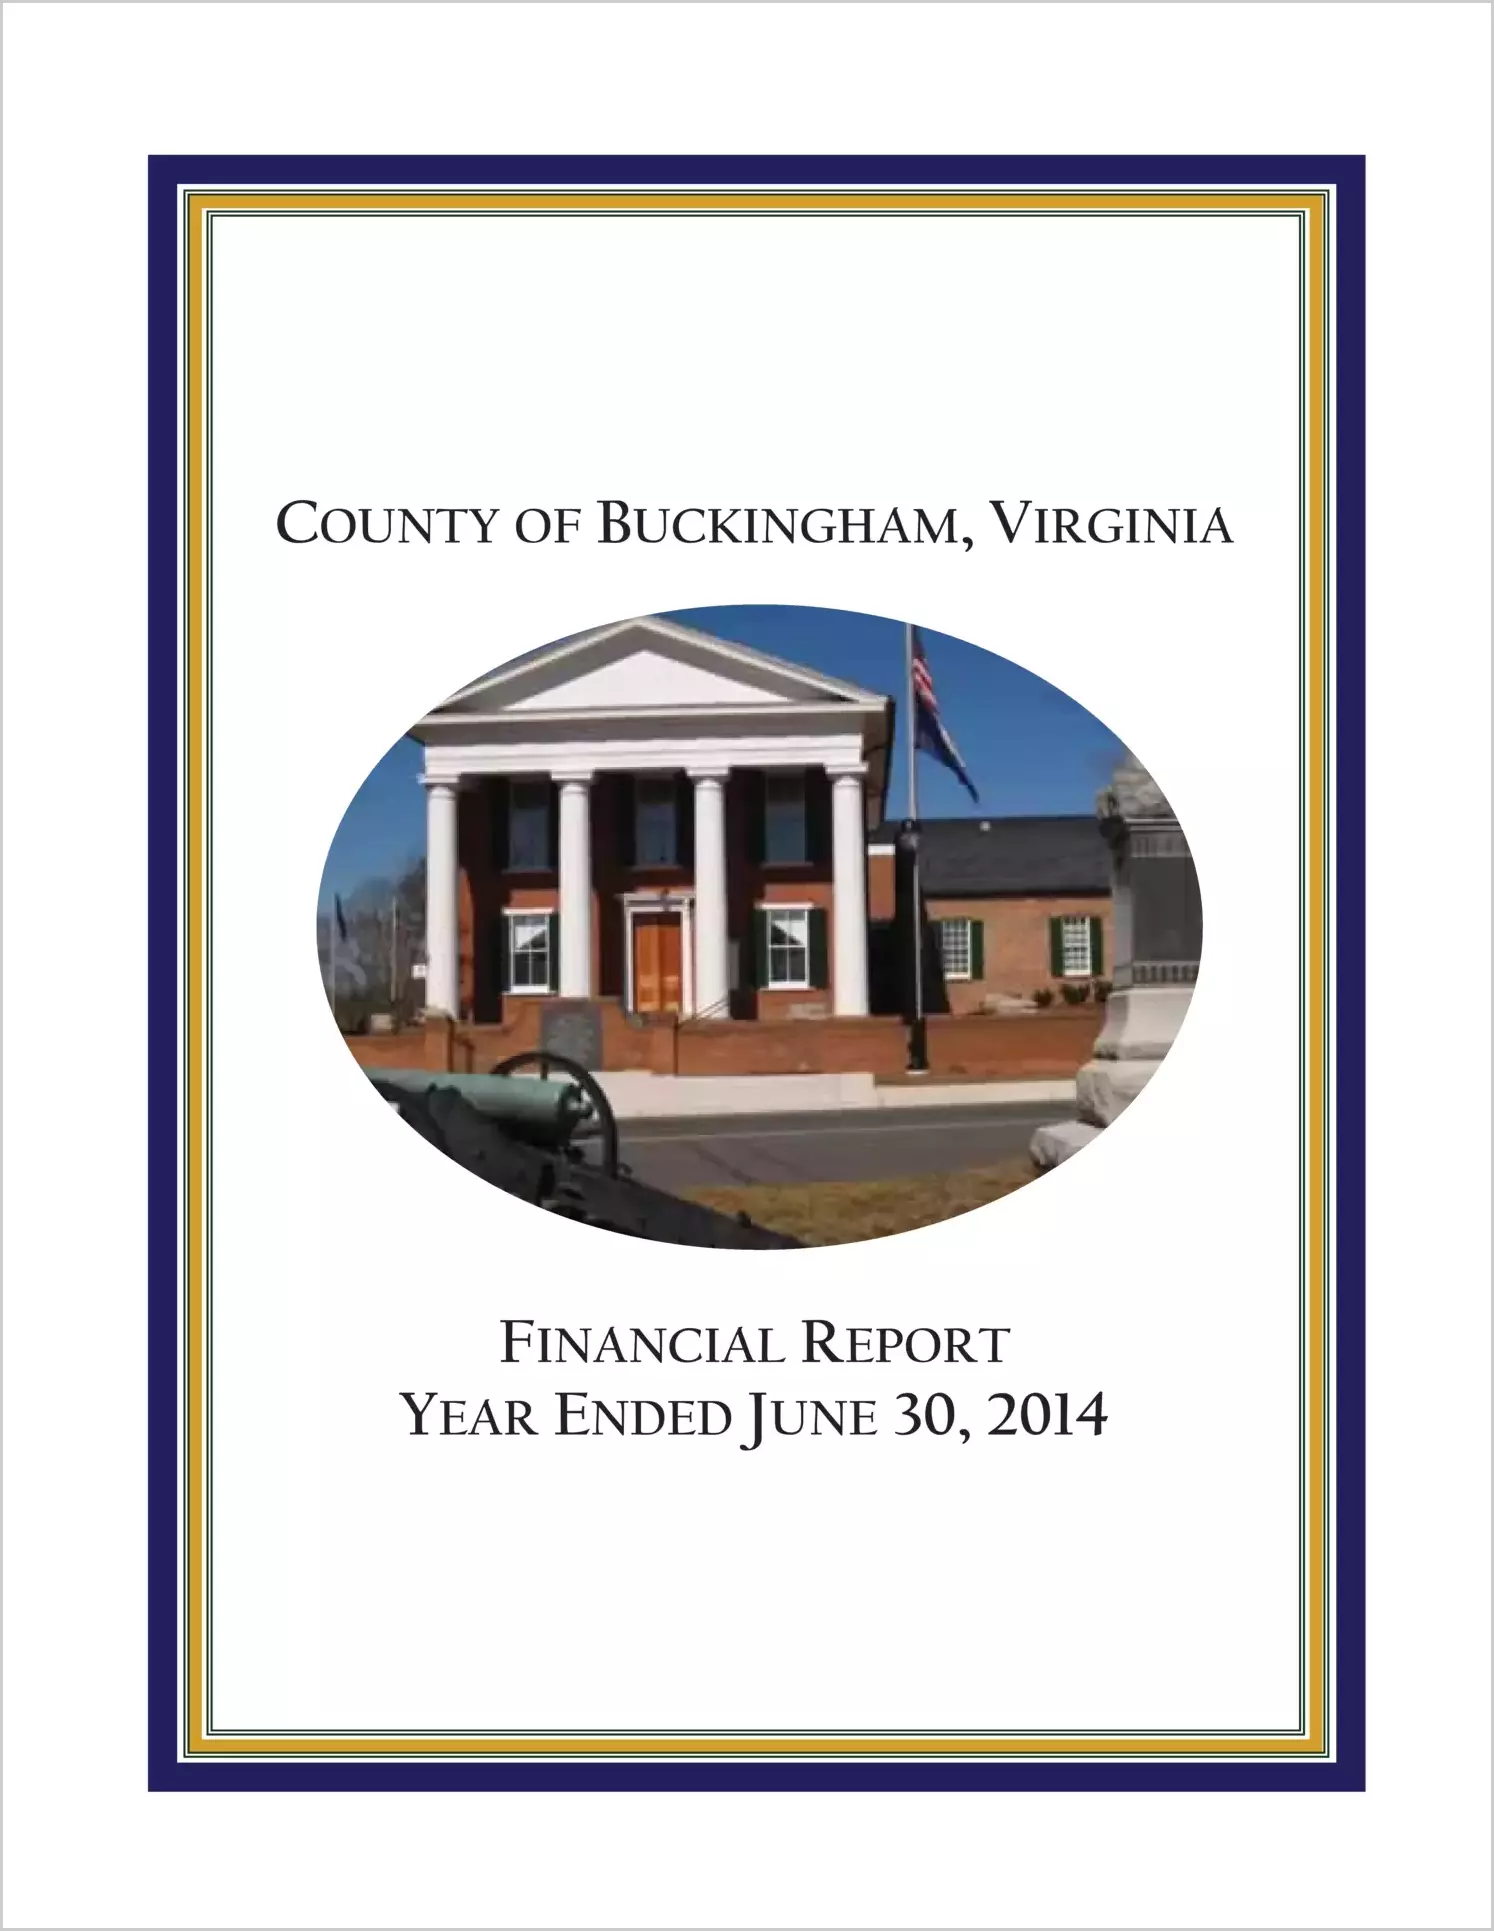 2014 Annual Financial Report for County of Buckingham